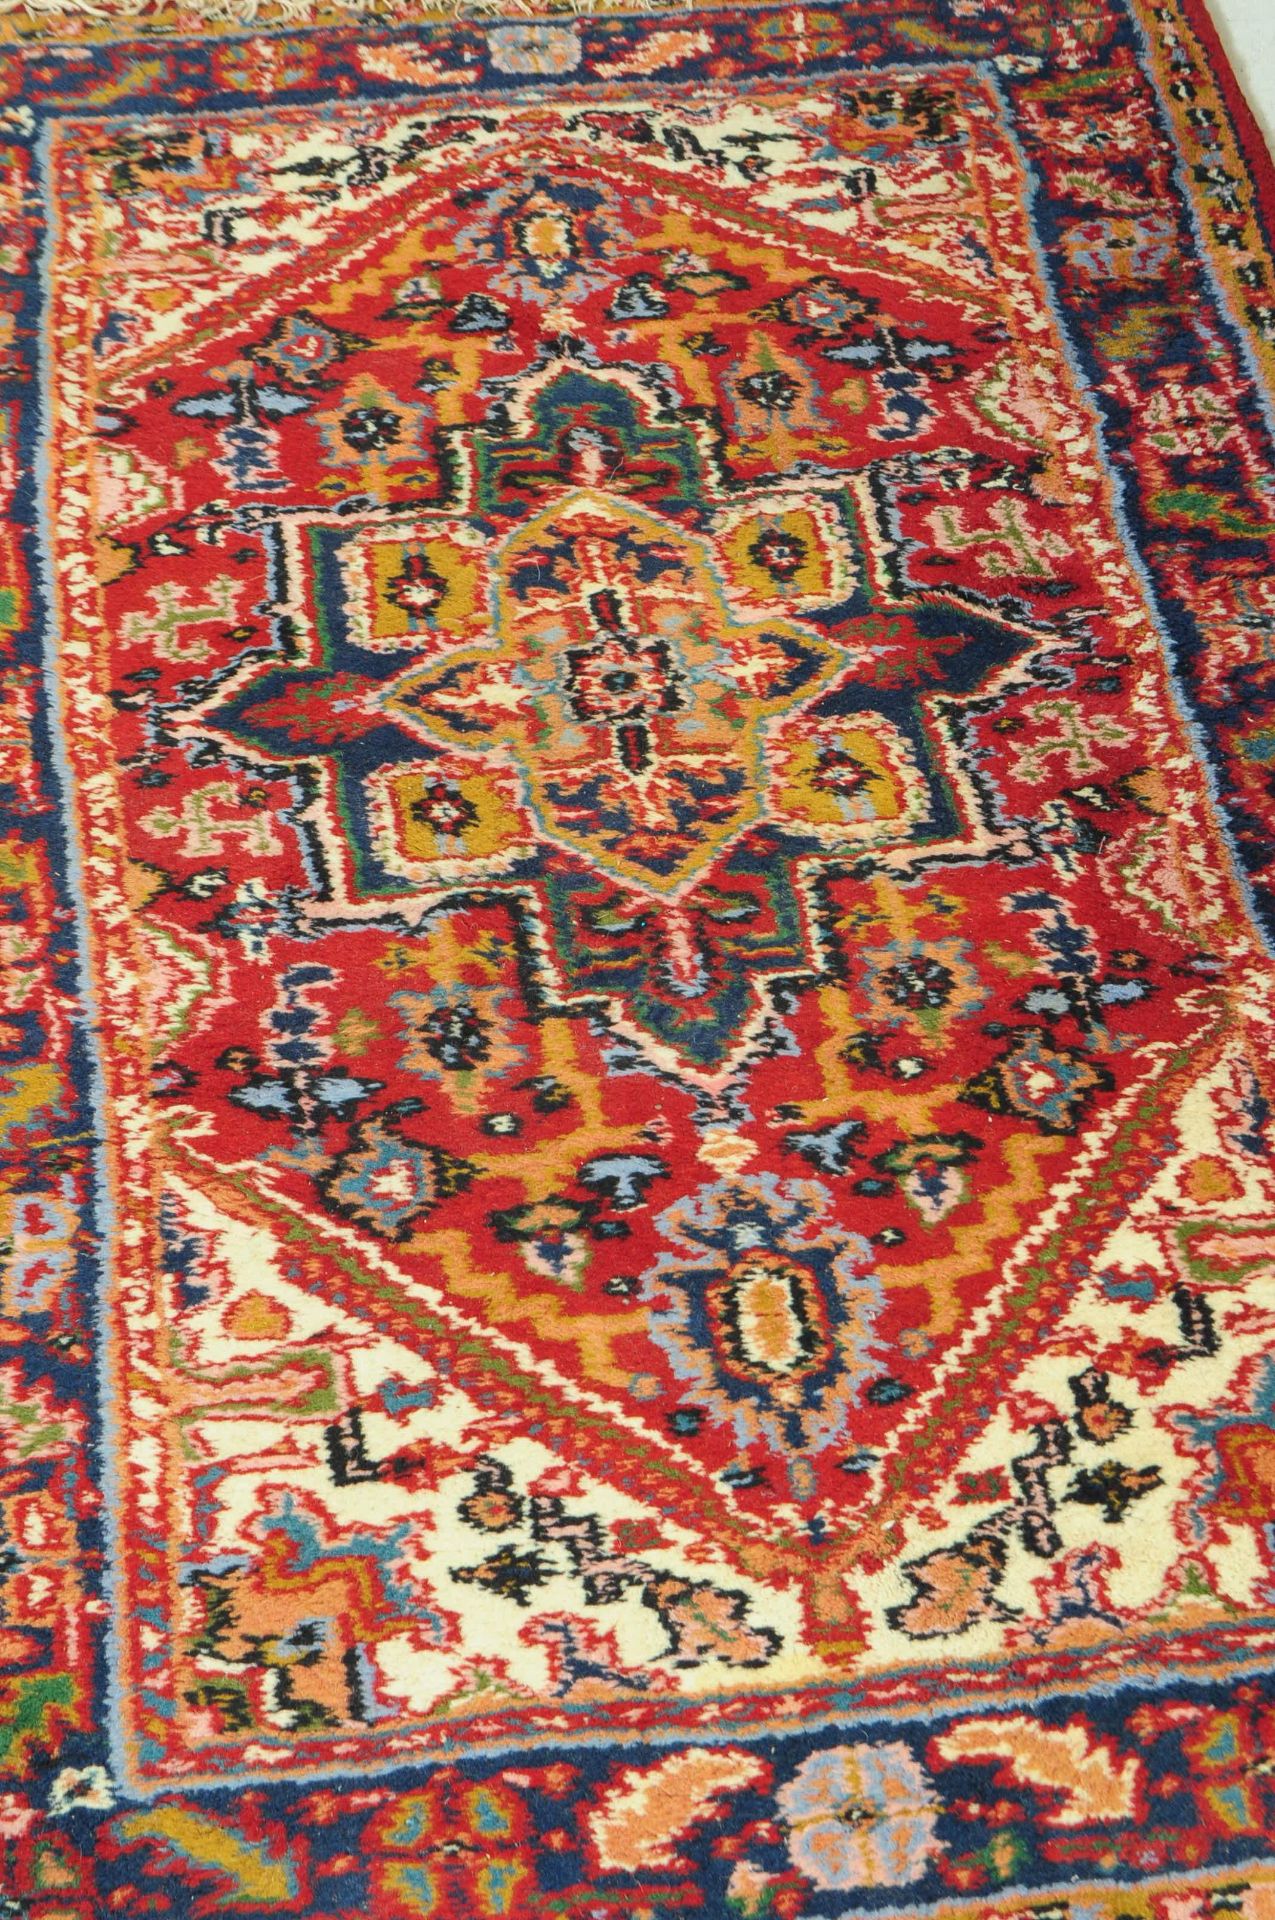 TWO LATE 20TH CENTURY PERSIAN MANNER WOOL RUGS - Image 2 of 4